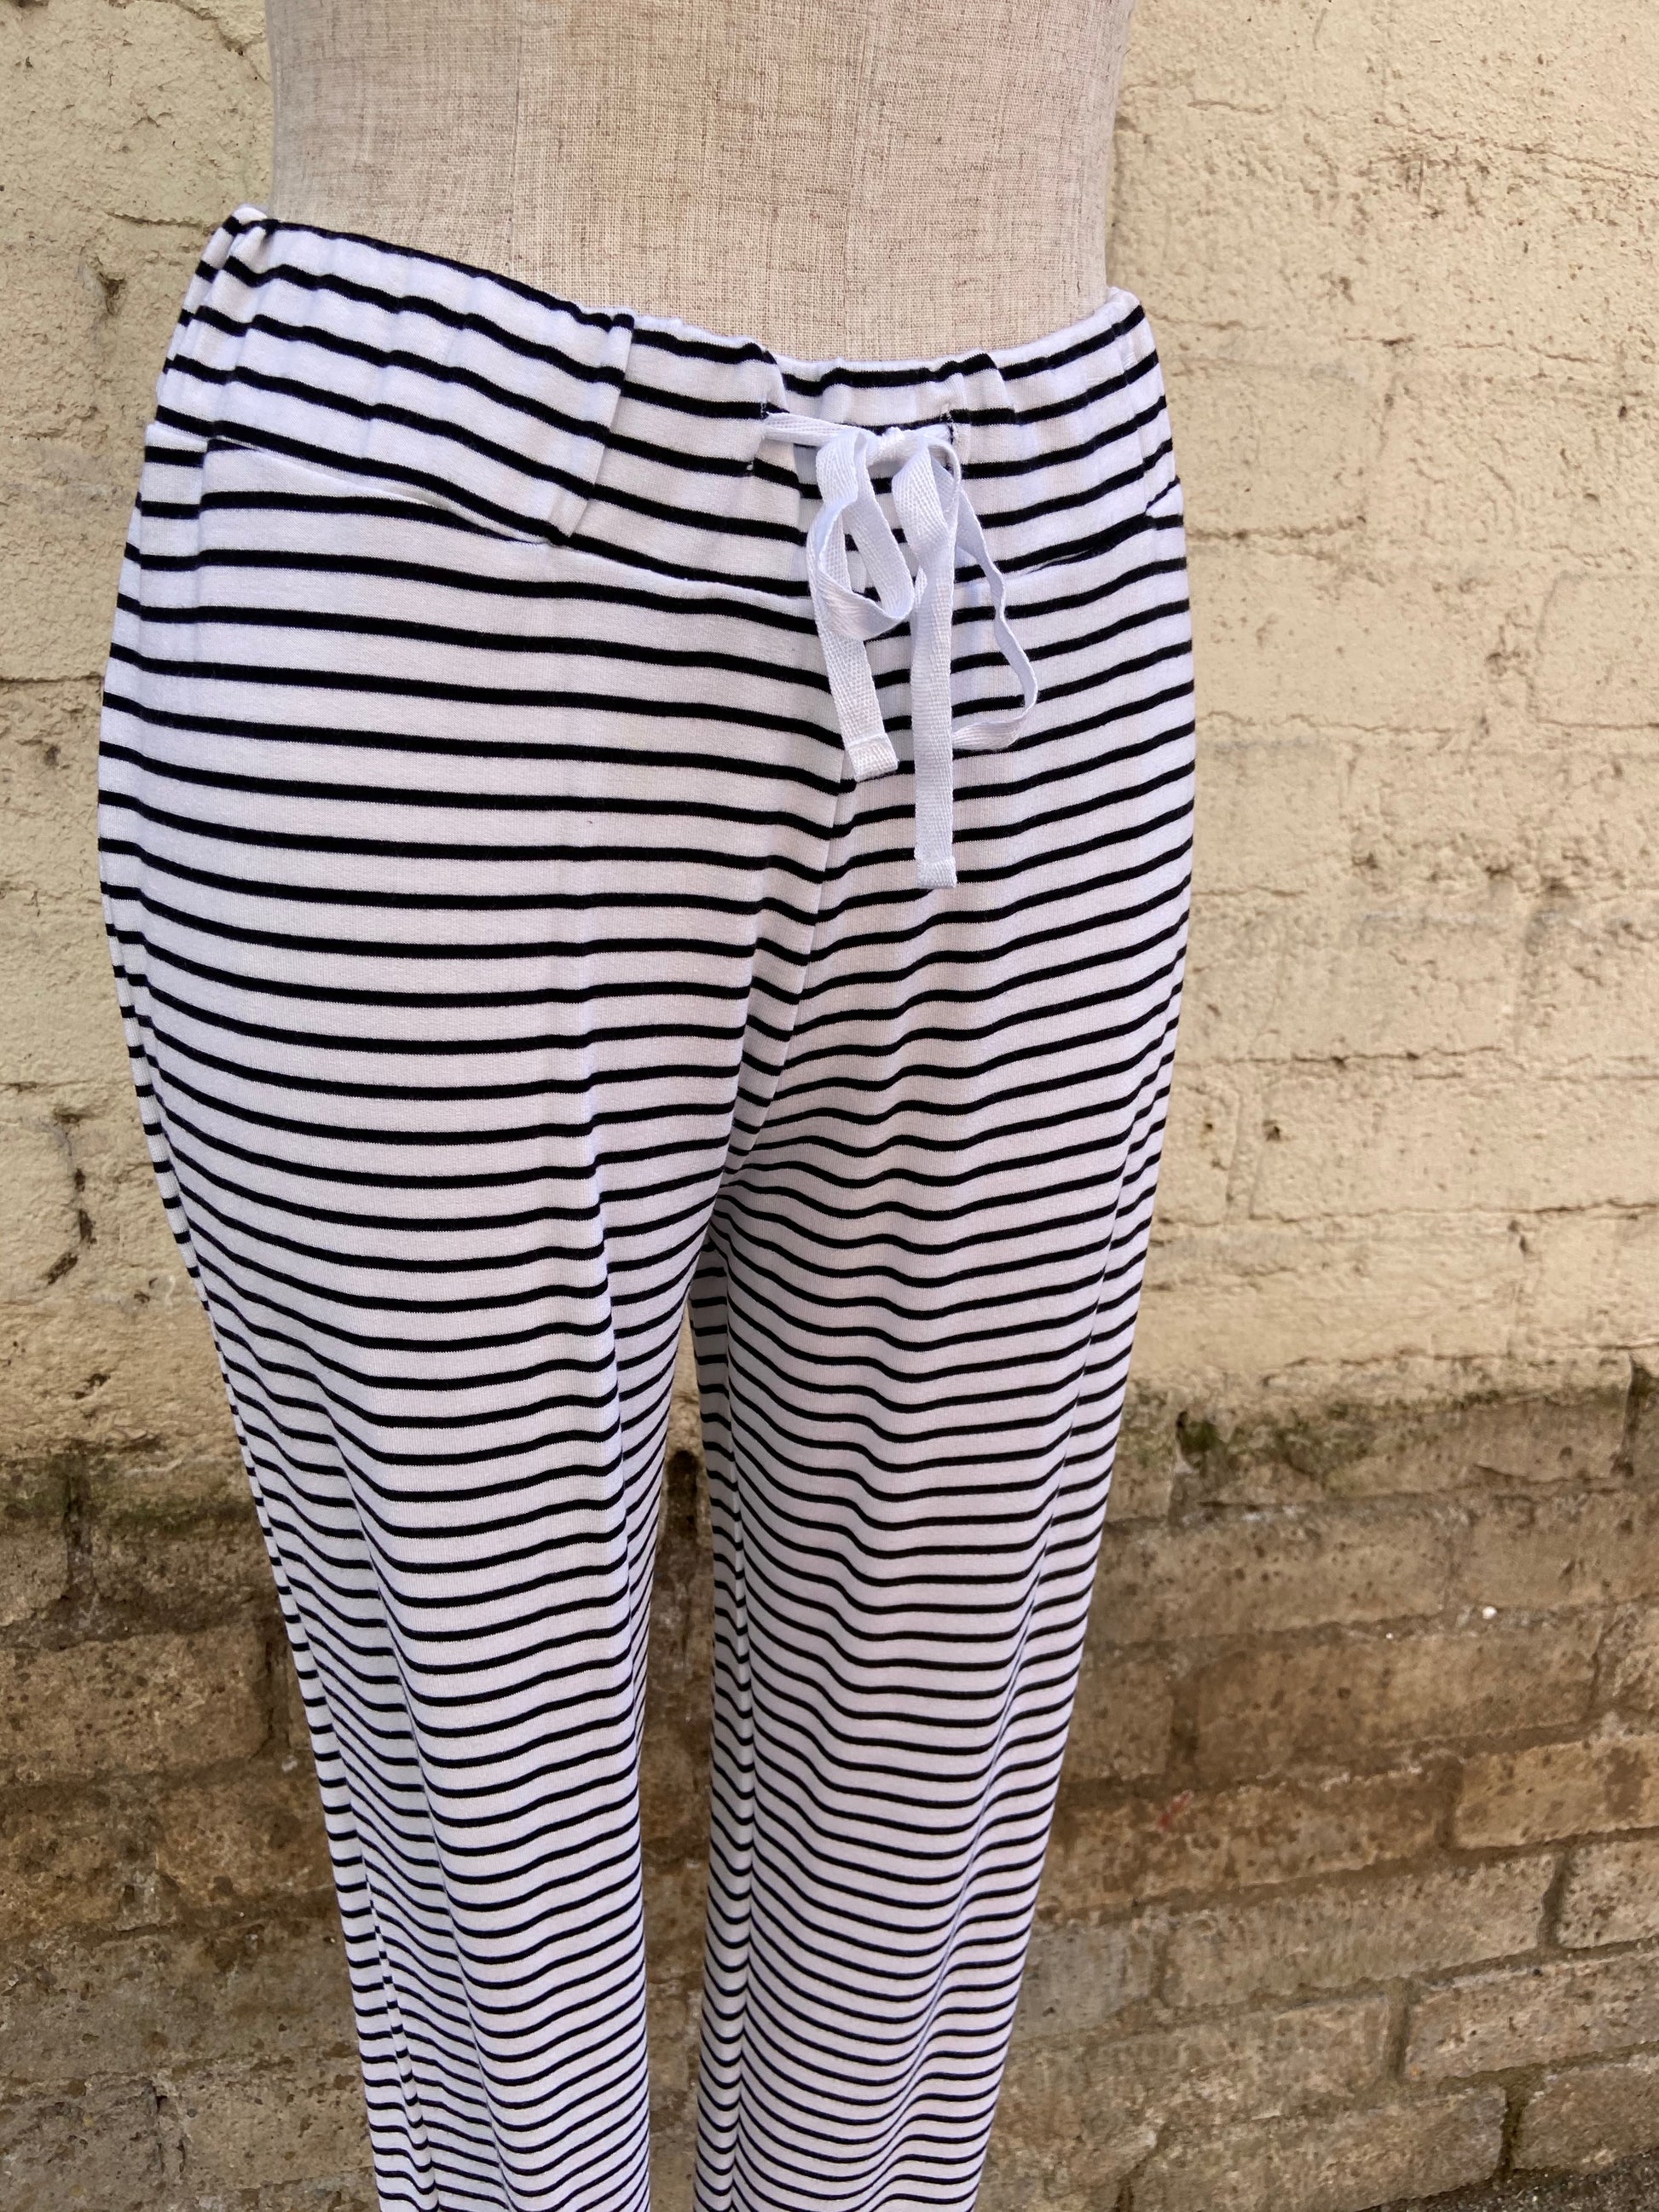 Whimsical lounge set that includes striped pants with a wide, drawstring waistband and a loose fitting sleeveless top. The top reads, "Bedtime, noun, 1. the time at which a person usually goes to bed: It's past my bedtime."